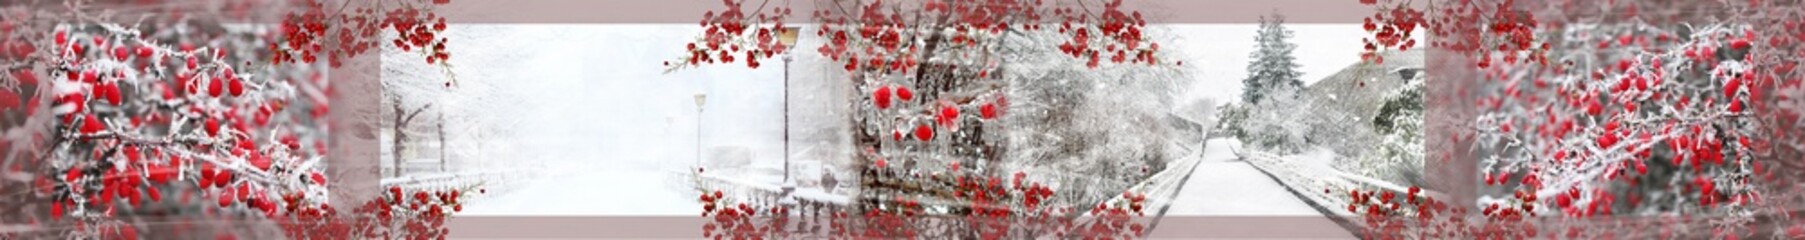 Winter panorama with branches of red berries